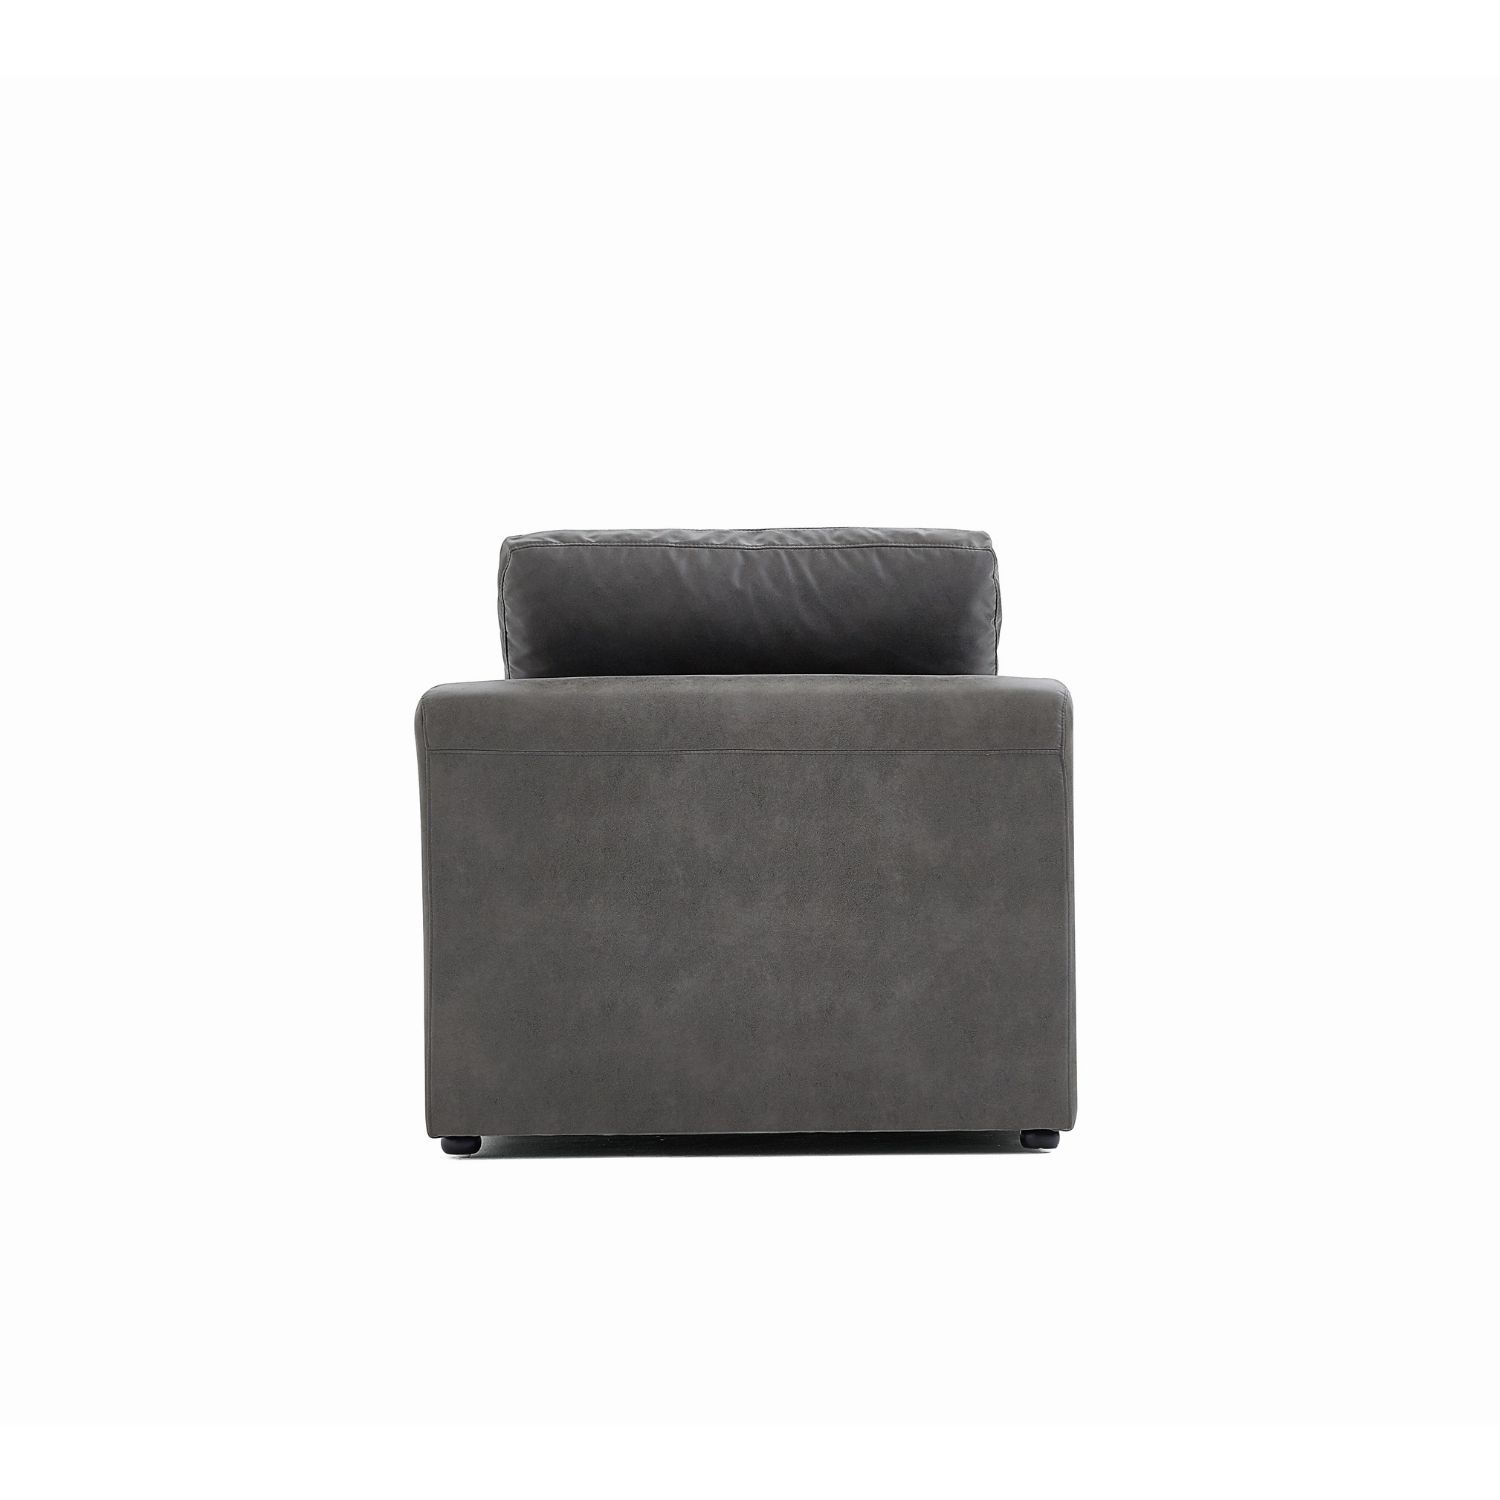 The 5th - Armless Seat Sofa Foundry 